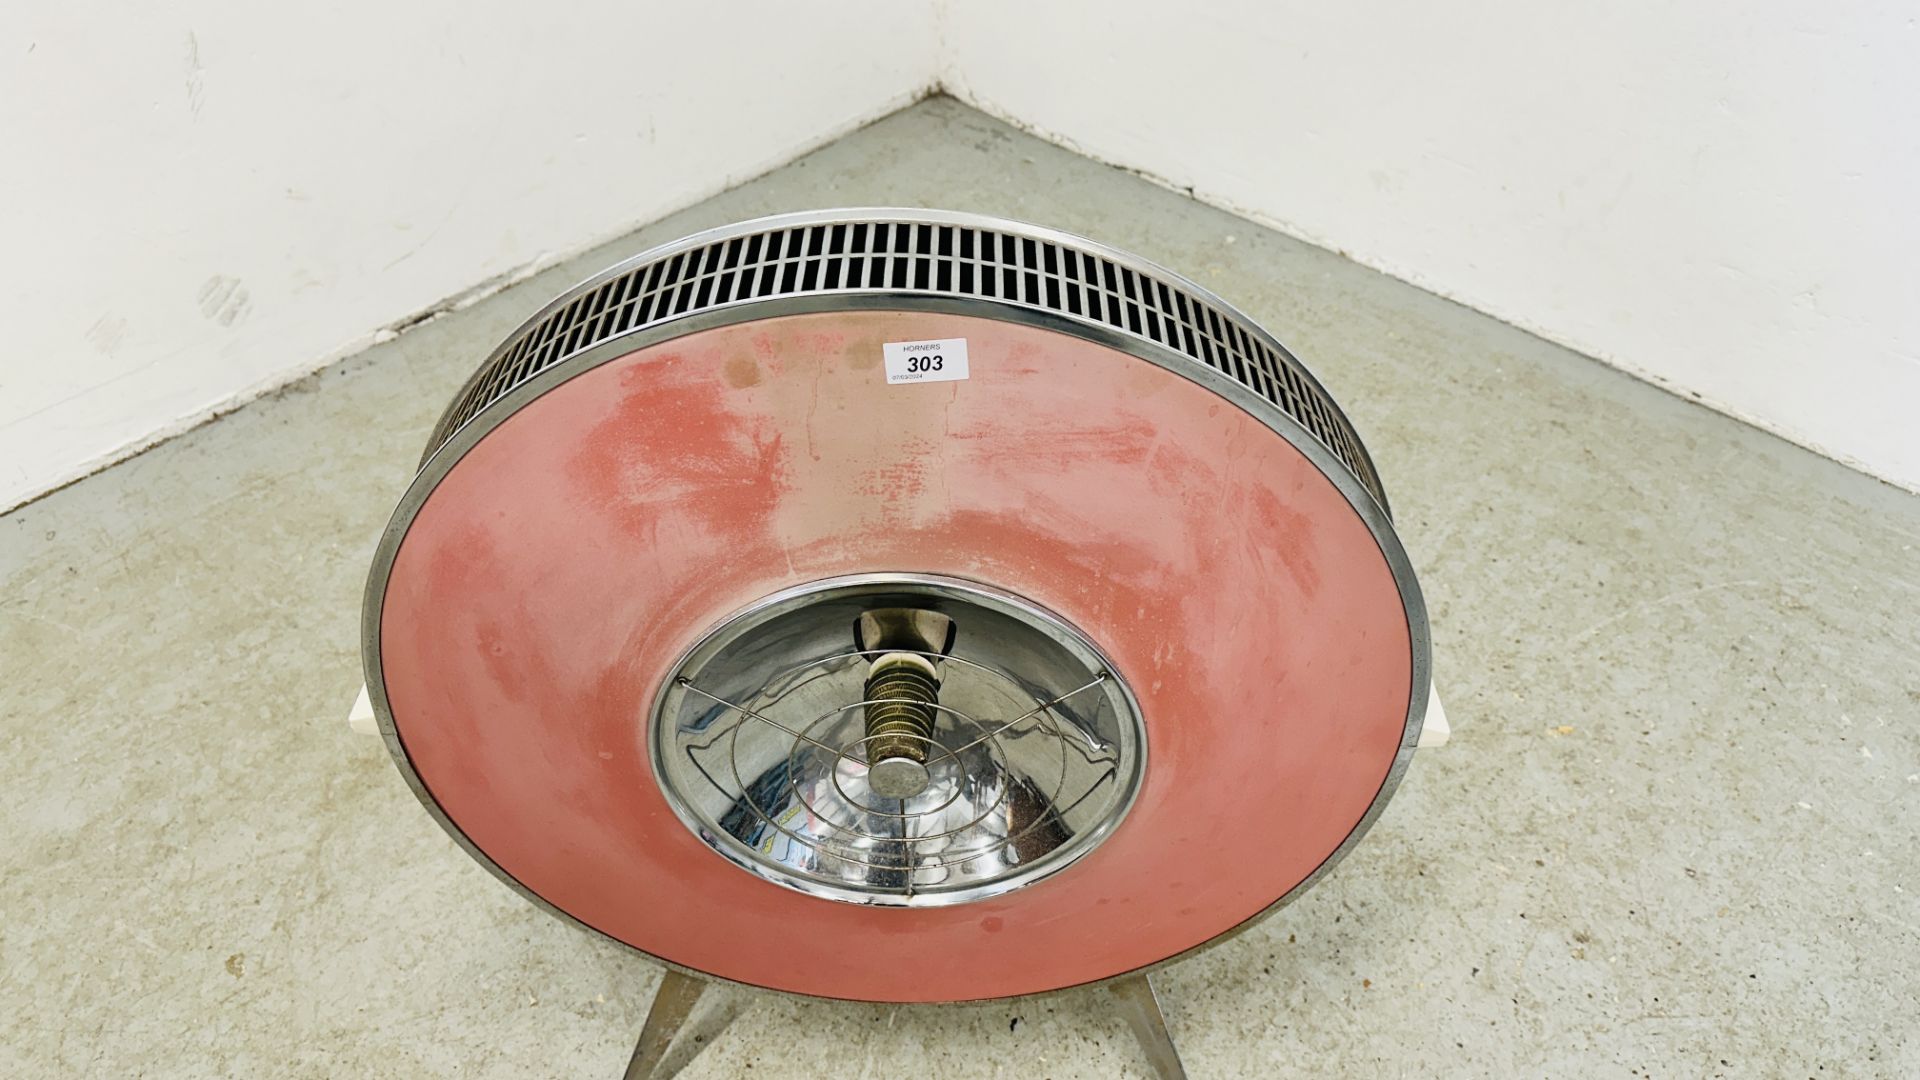 A VINTAGE SOFONO SPACEMASTER ELECTRIC HEATER - COLLECTORS ITEM ONLY - SOLD AS SEEN. - Image 2 of 6